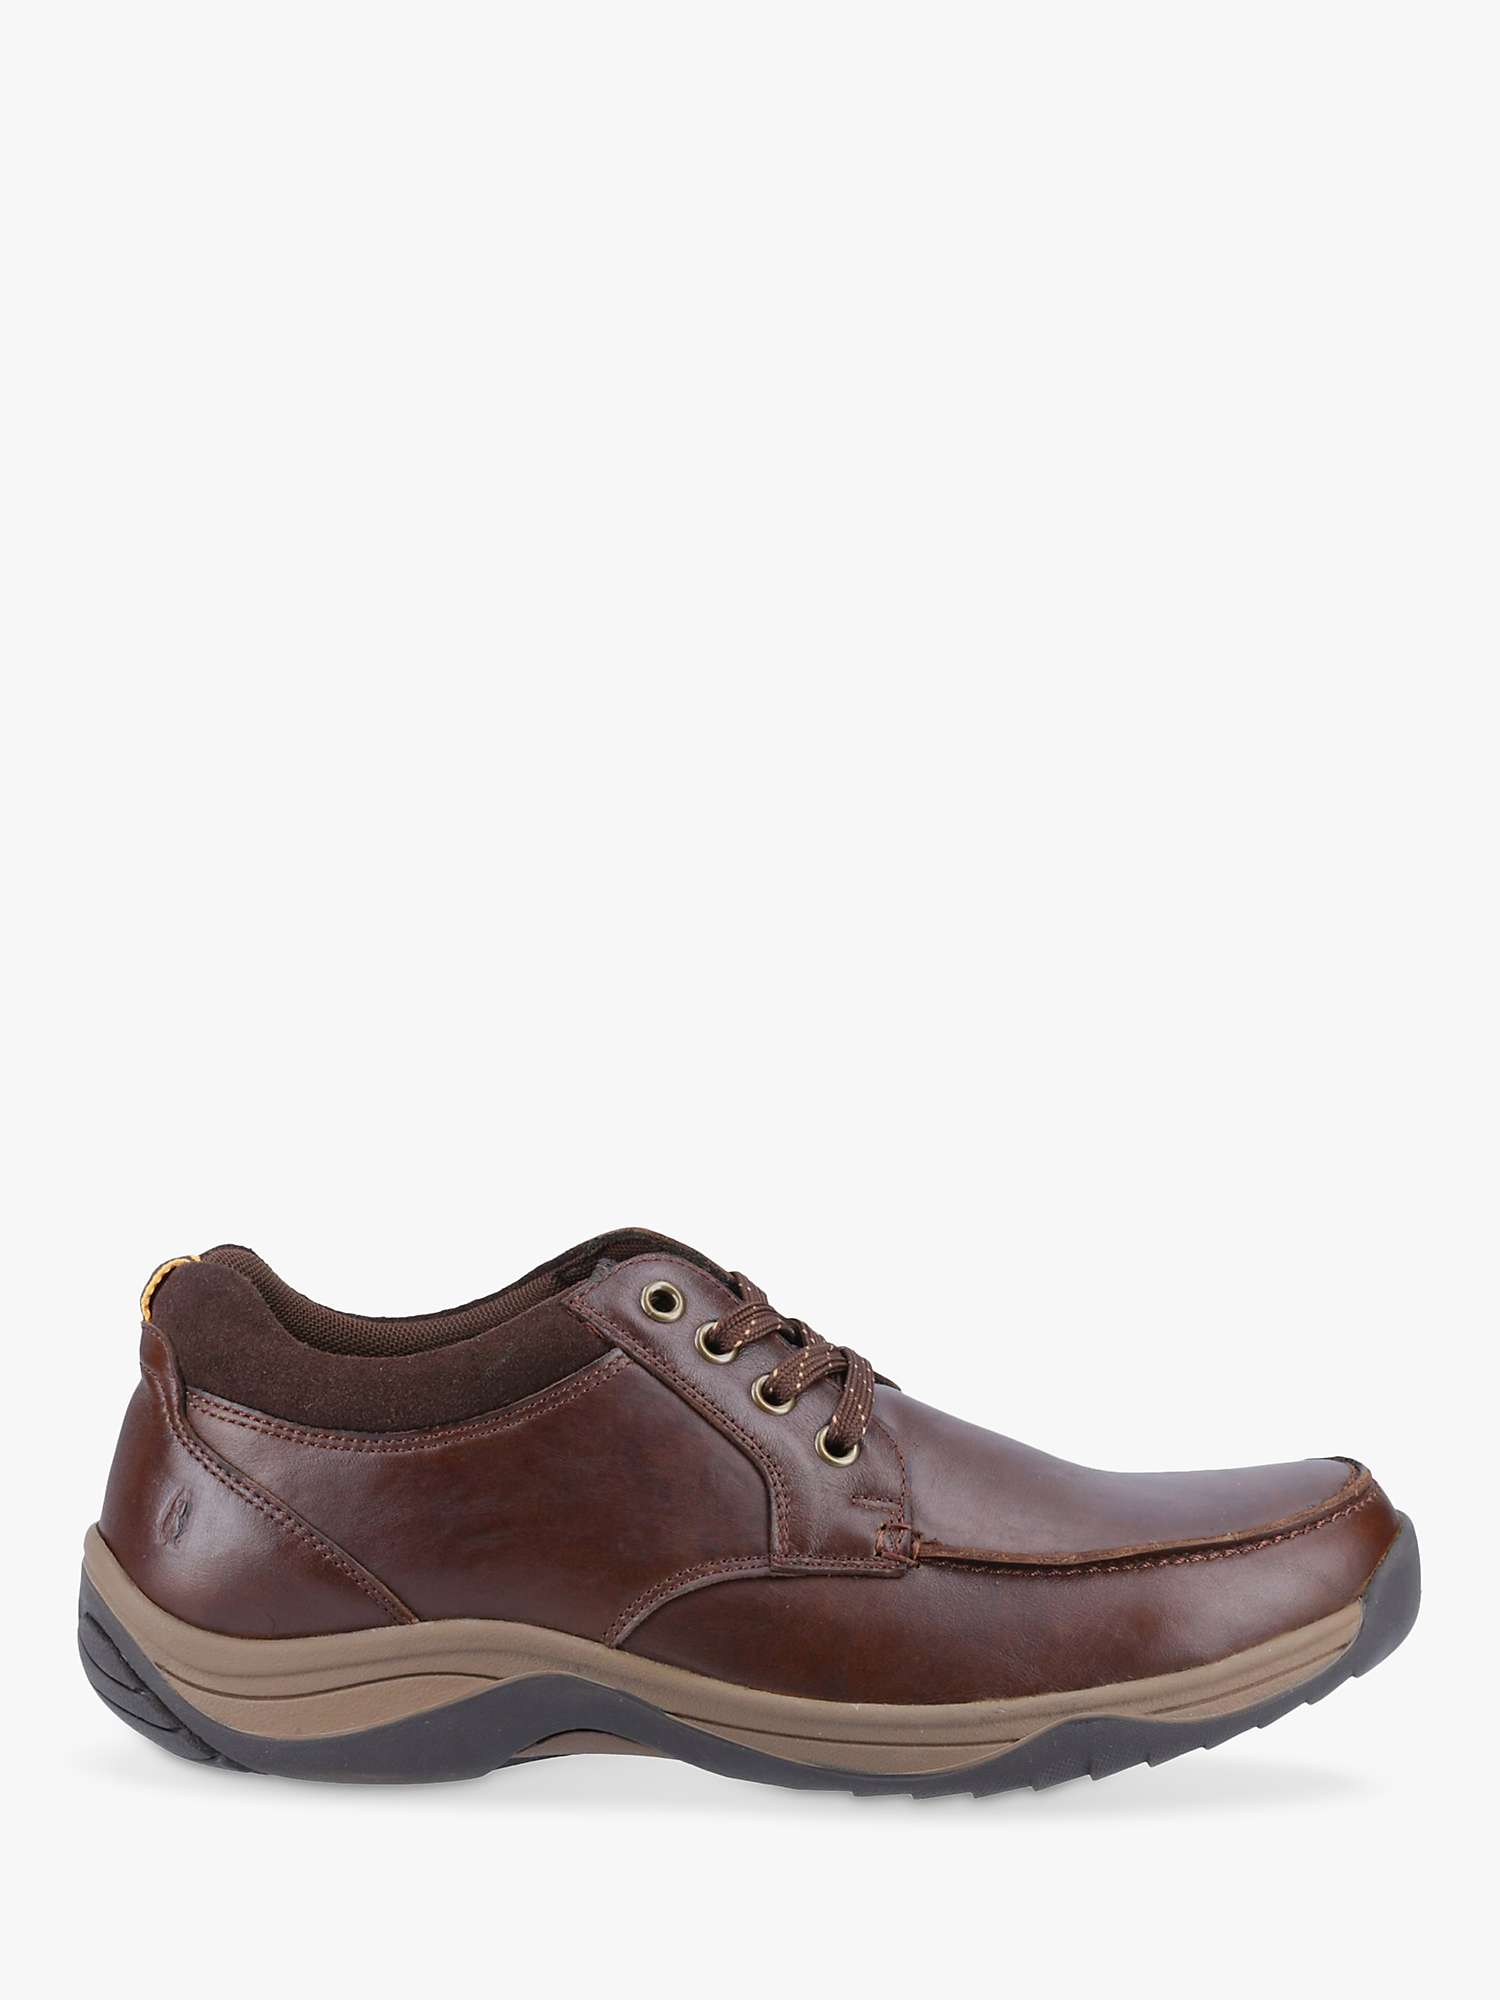 Buy Hush Puppies Derek Leather Lace Up Shoes Online at johnlewis.com